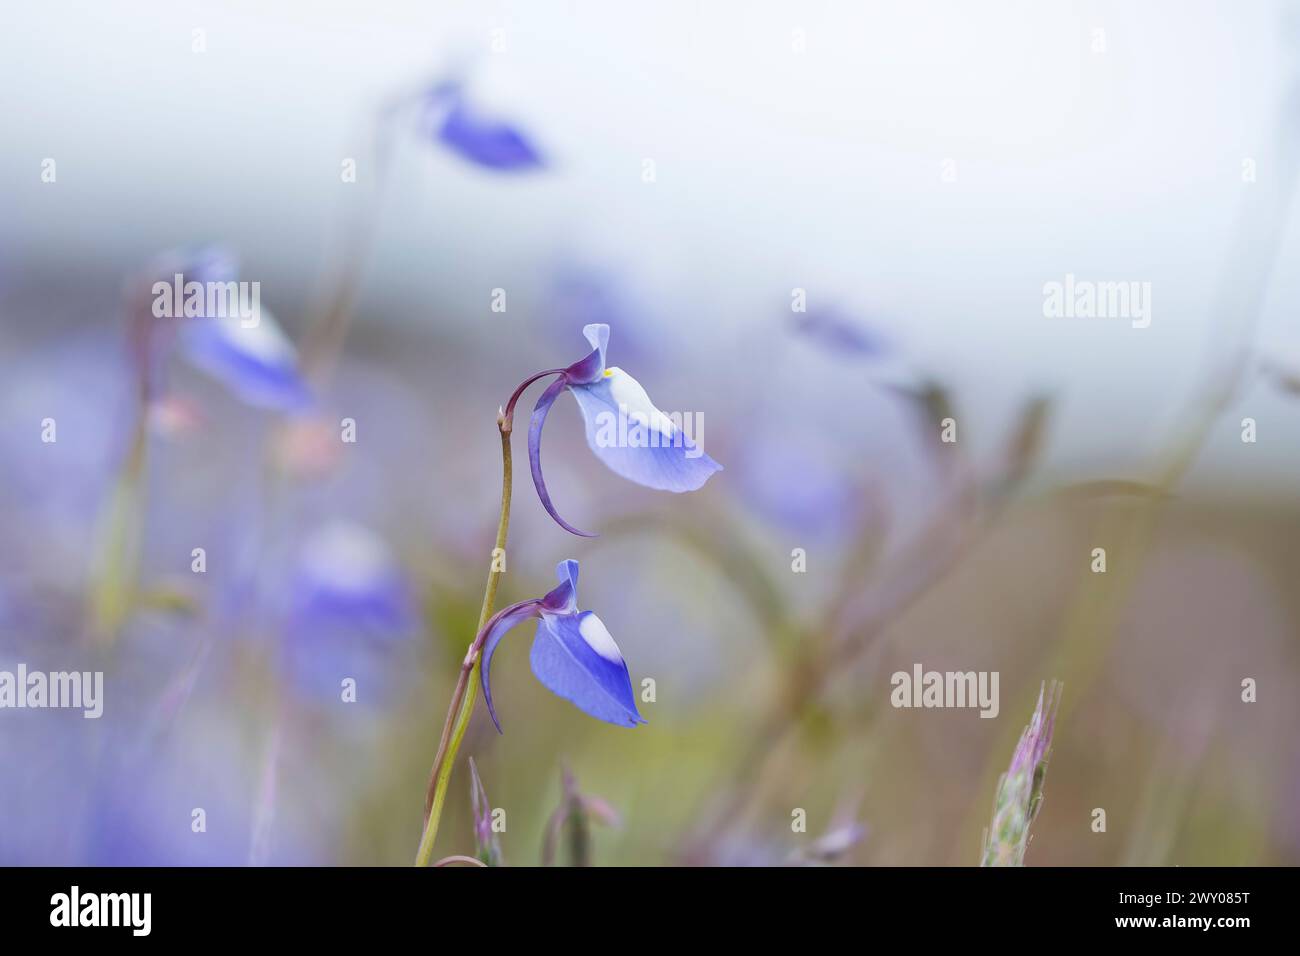 Dreamy blue Utricularia reticulata flowers sway in the gentle breeze, captured in a soft-focus photograph with a hazy, misty background. Stock Photo